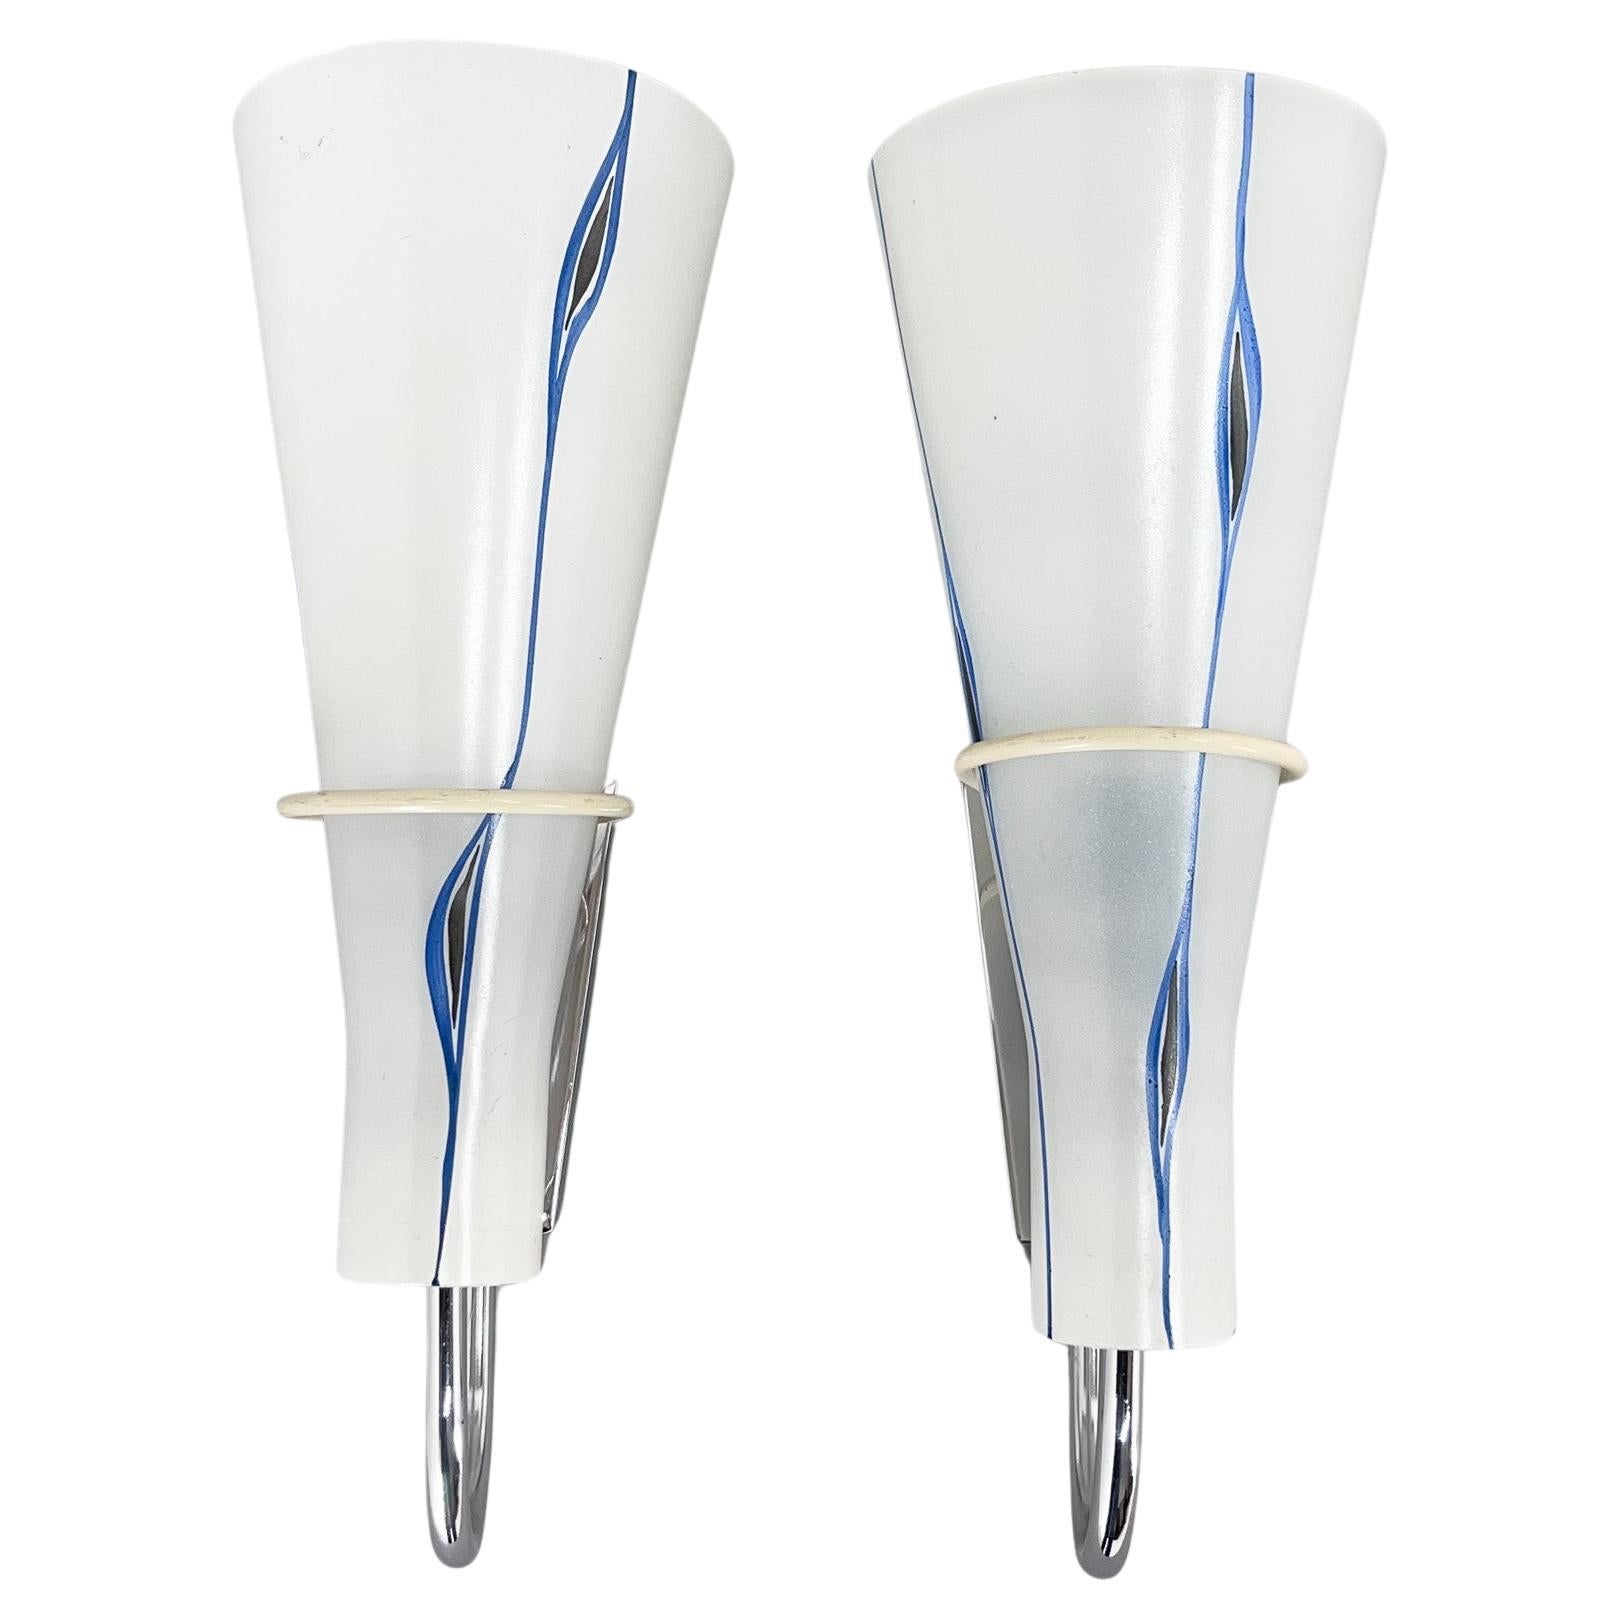 Pair of 1960s Chrome & Glass Wall Lamps by Zukov, 2 Pairs Available For Sale